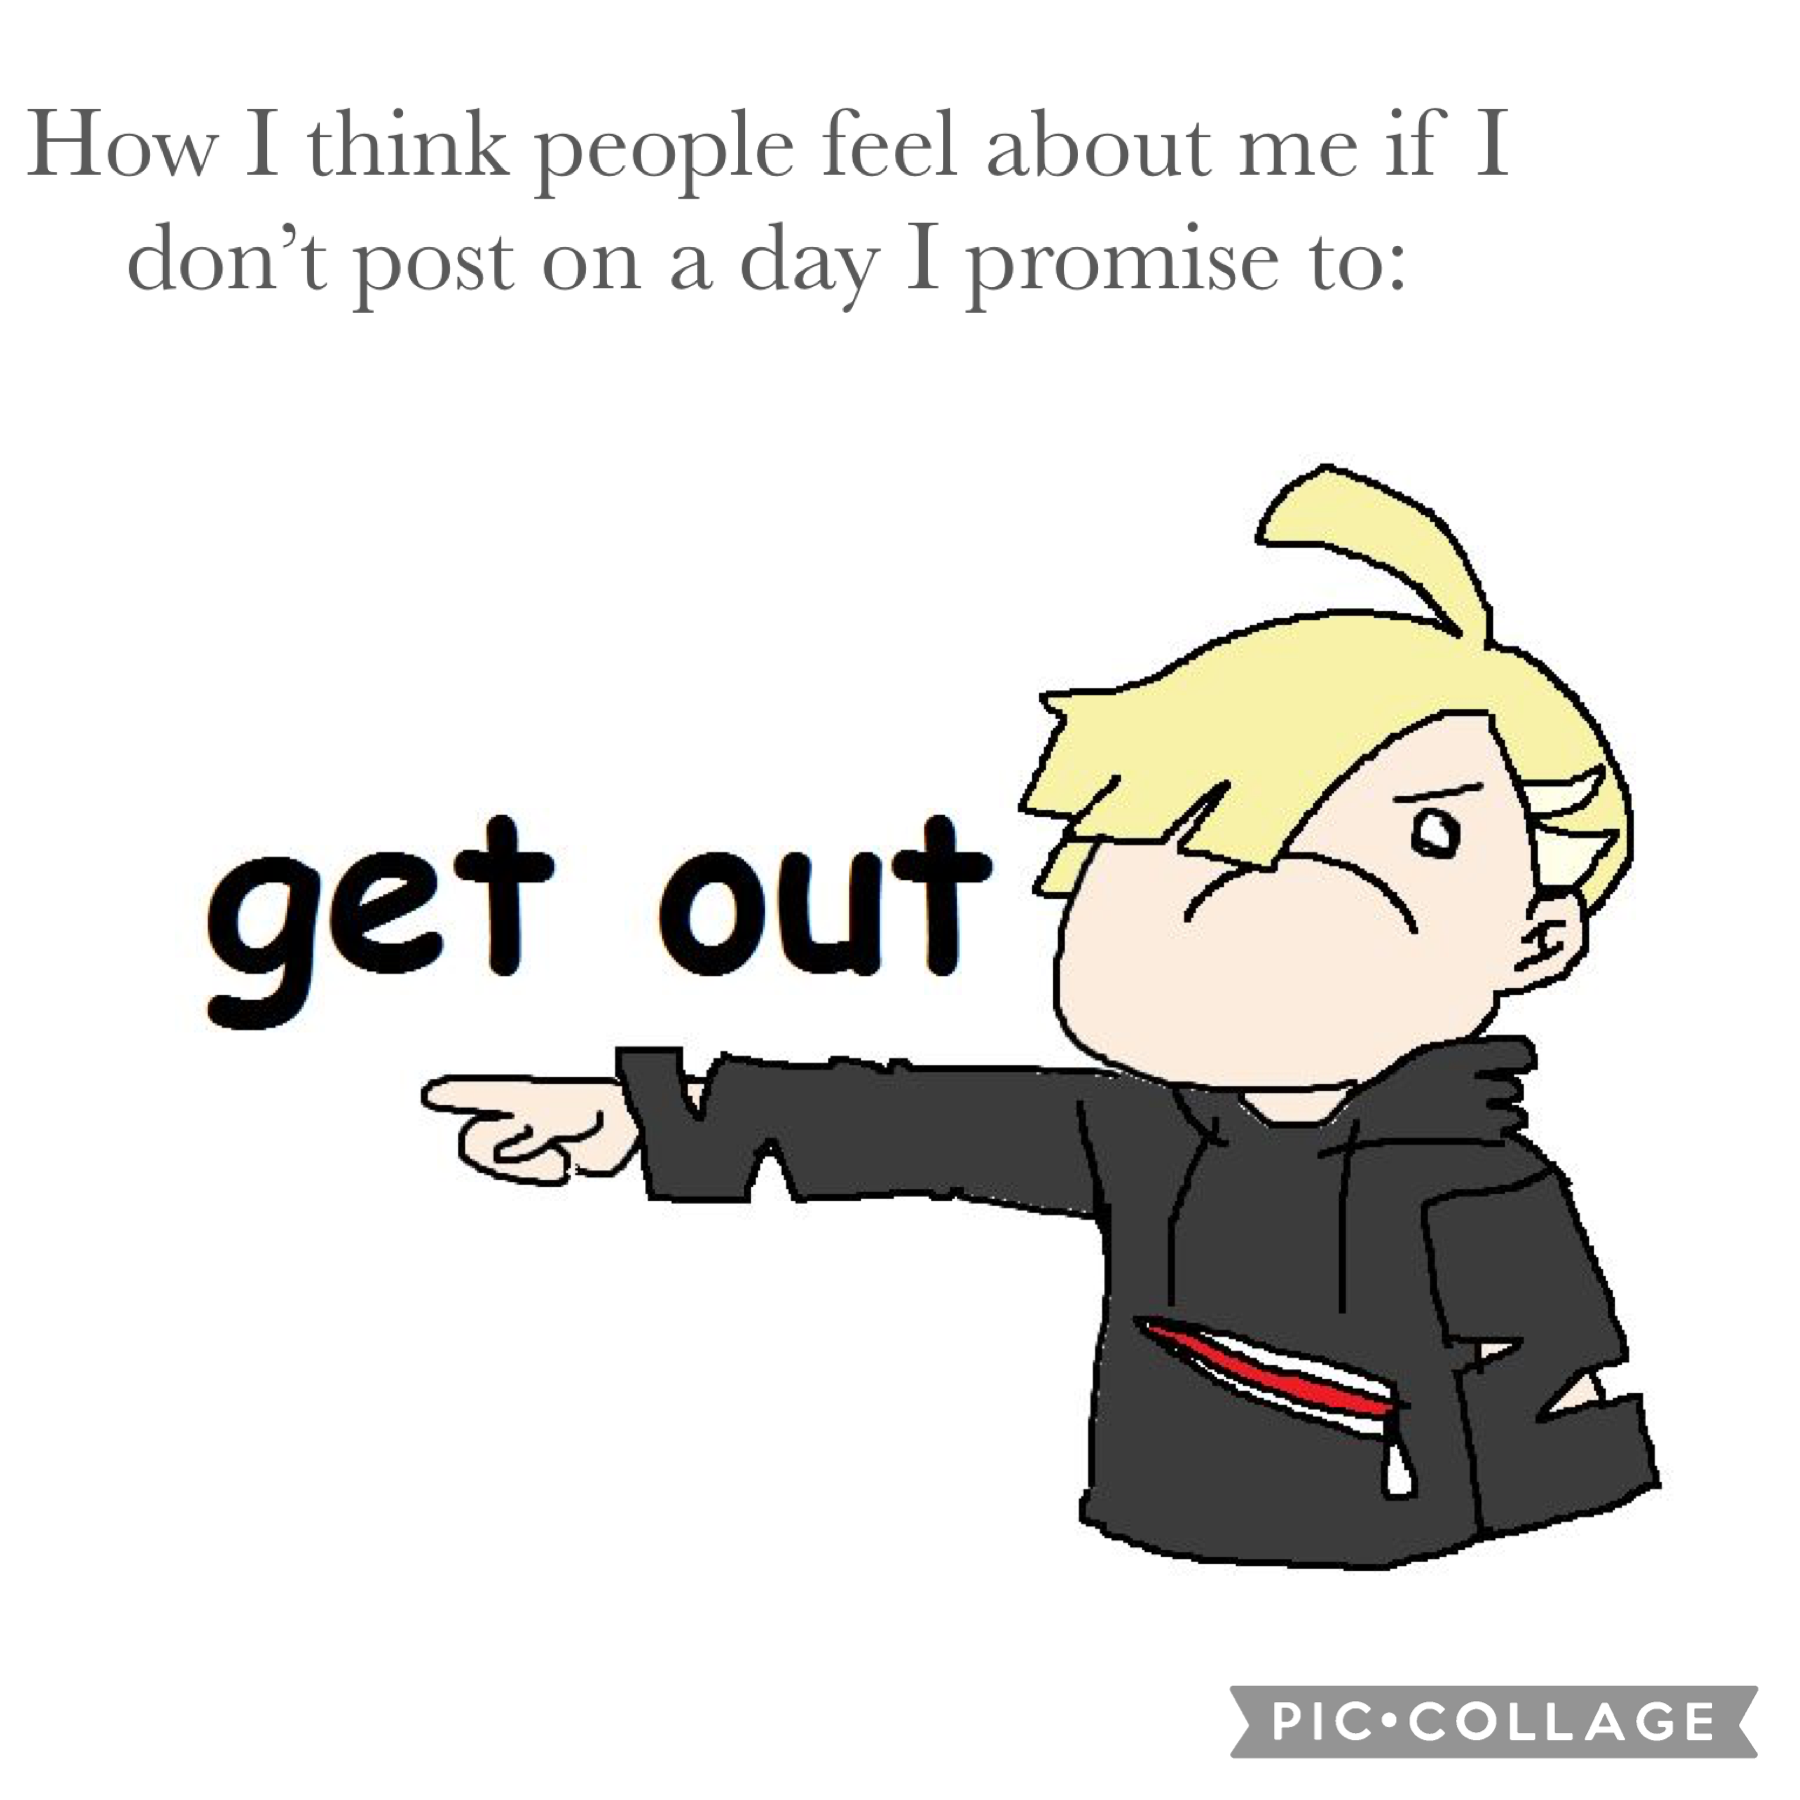 Gladion memes galore 🥰 also I am so sorry for missing this Monday’s post, I got too busy and didn’t finish the collage in time. I’ll post the one I promised to post this coming Monday :)